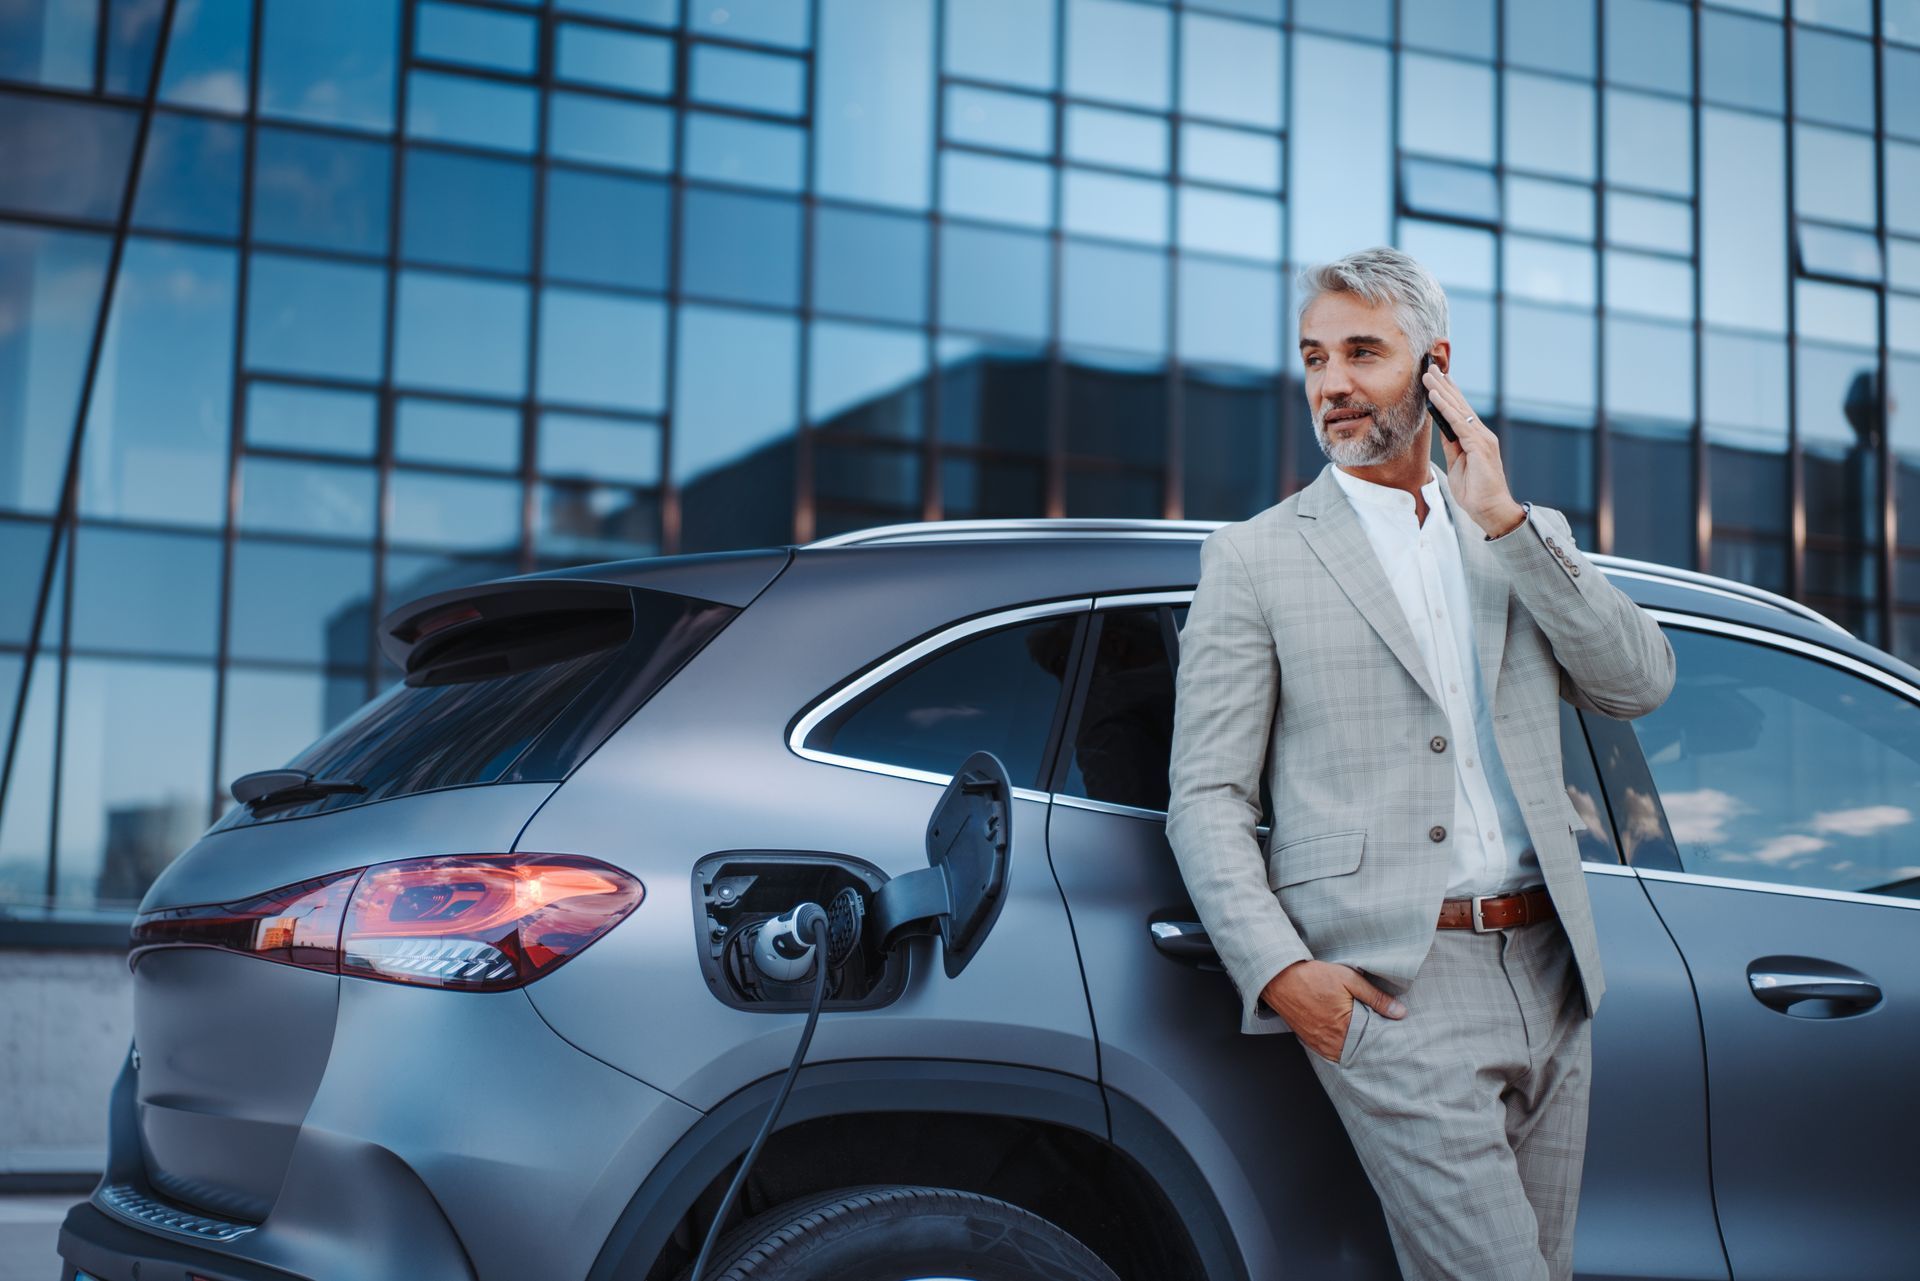 A man in a suit is leaning against a car while talking on a cell phone.